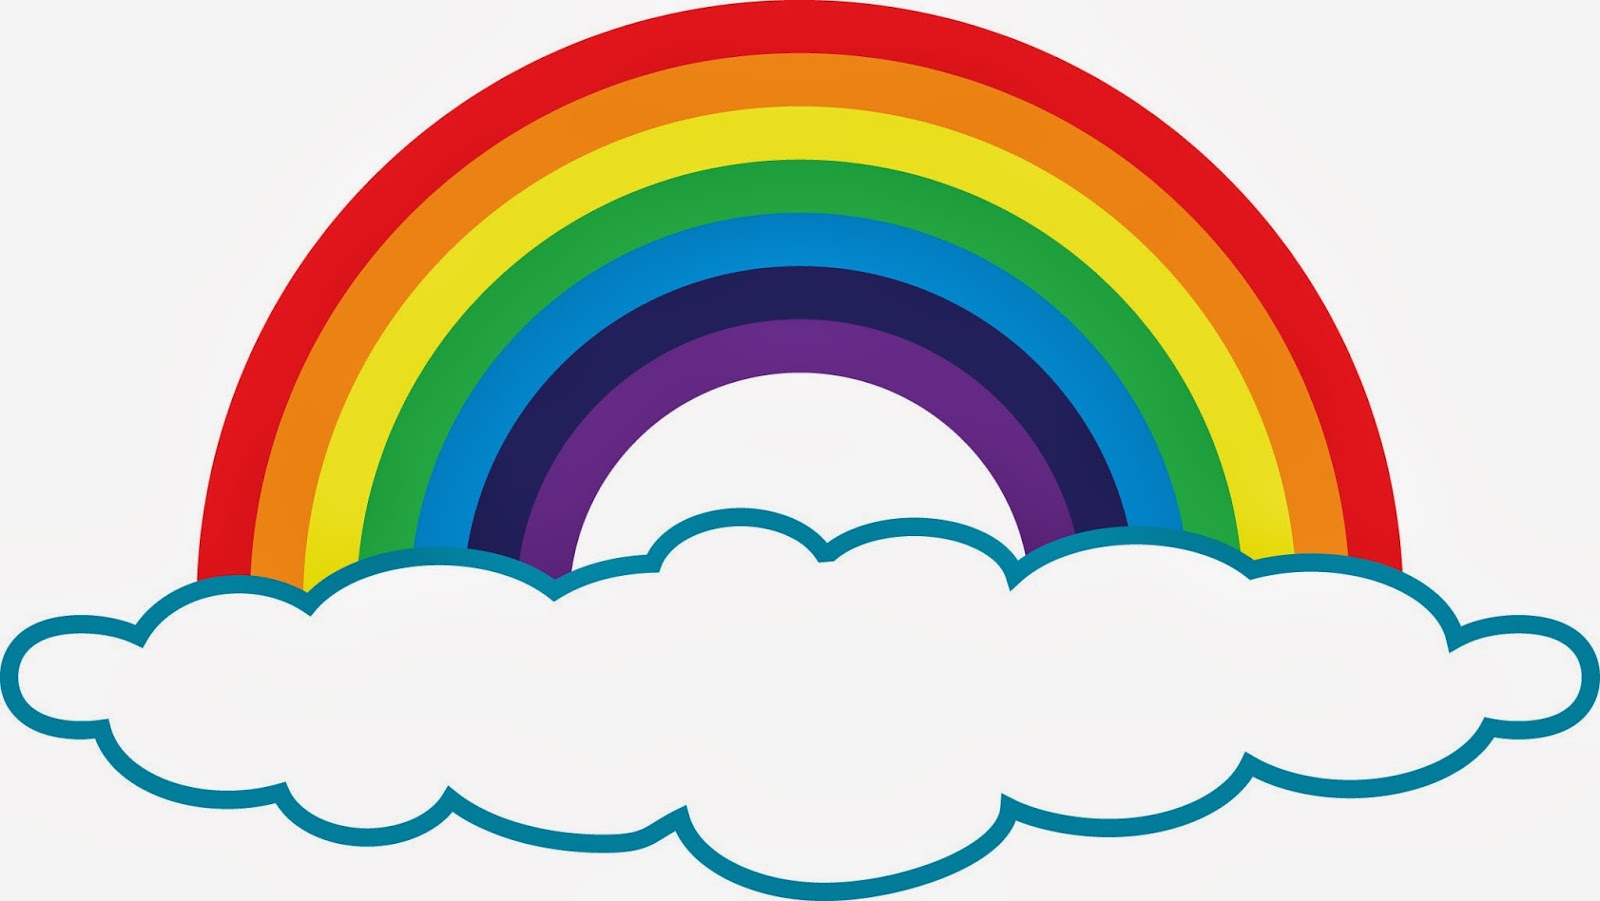 rainbow clipart free download - photo #5